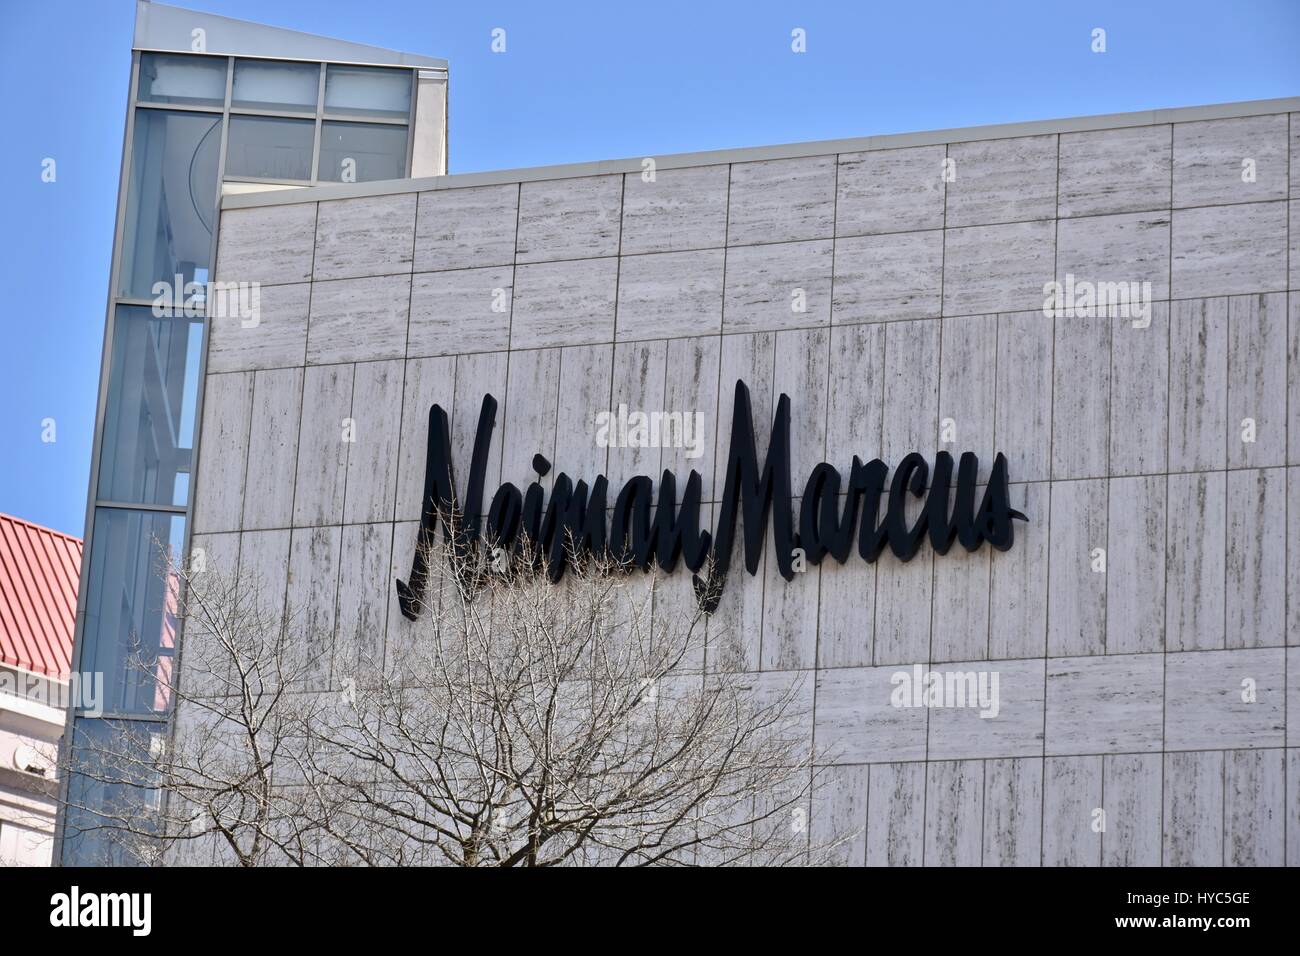 Neiman Marcus store a Chevy Chase village Foto Stock